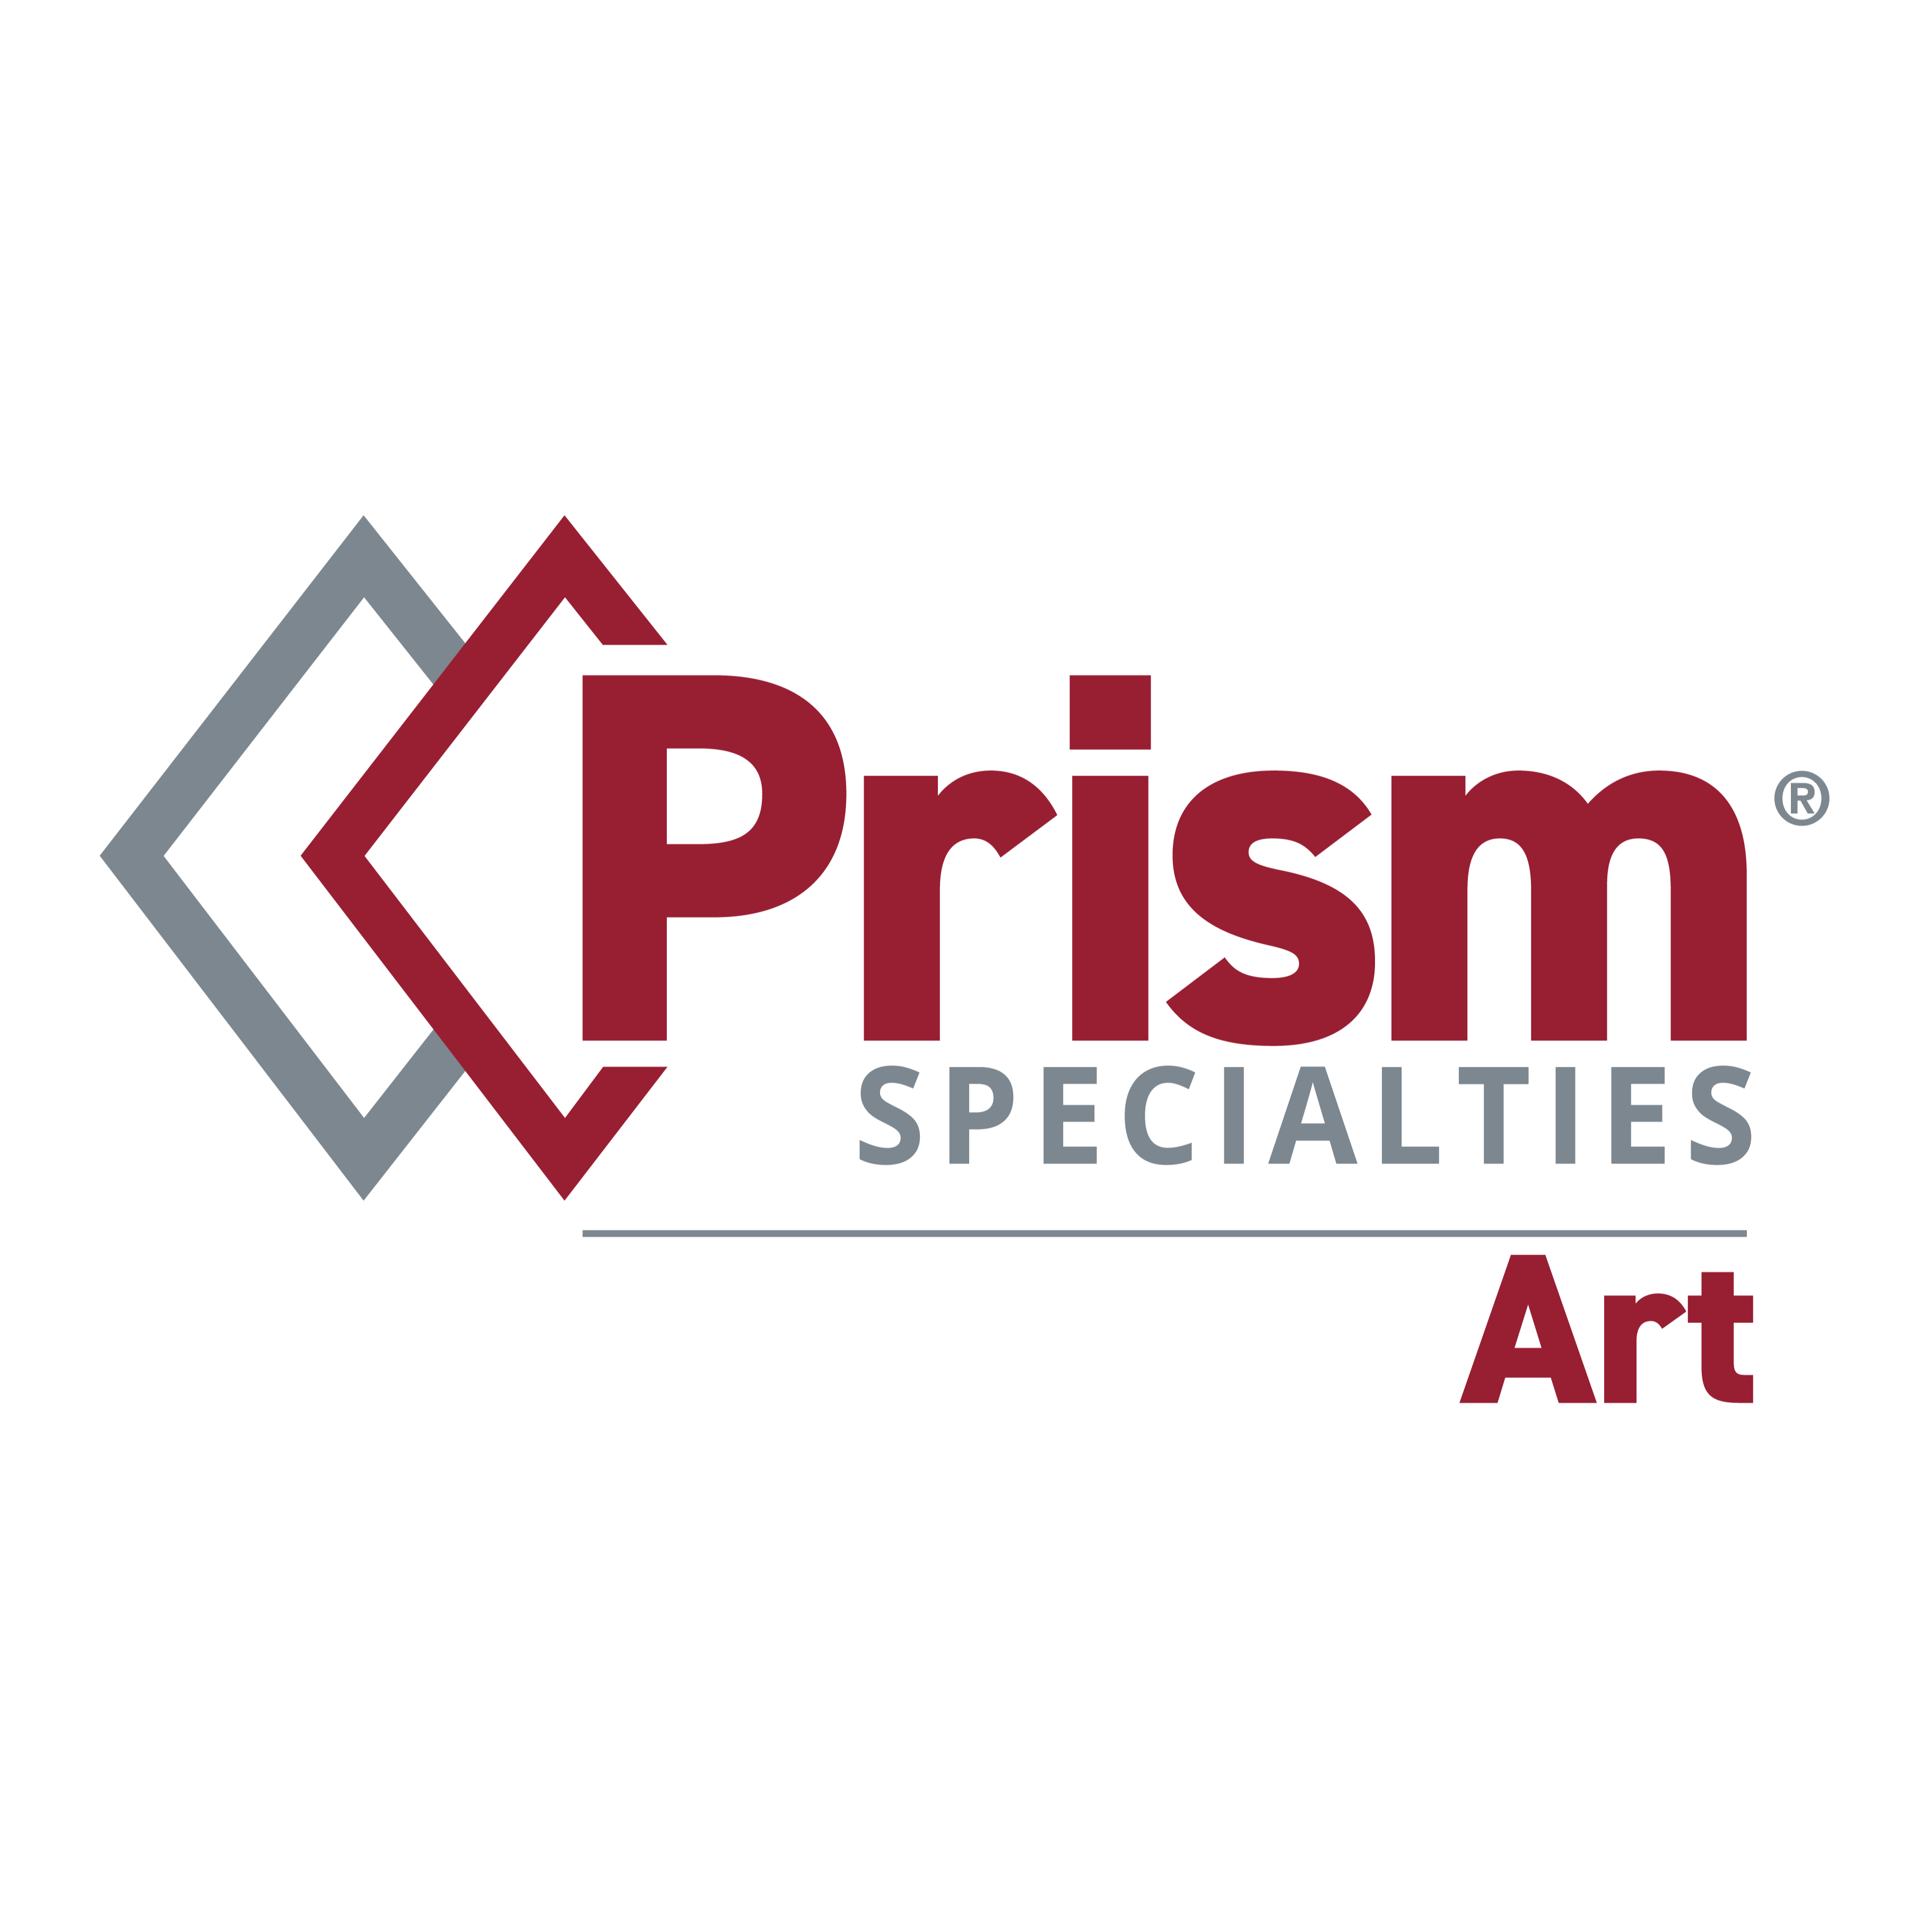 Prism Specialties Art of Greater Houston - Houston, TX 77040 - (281)213-0780 | ShowMeLocal.com